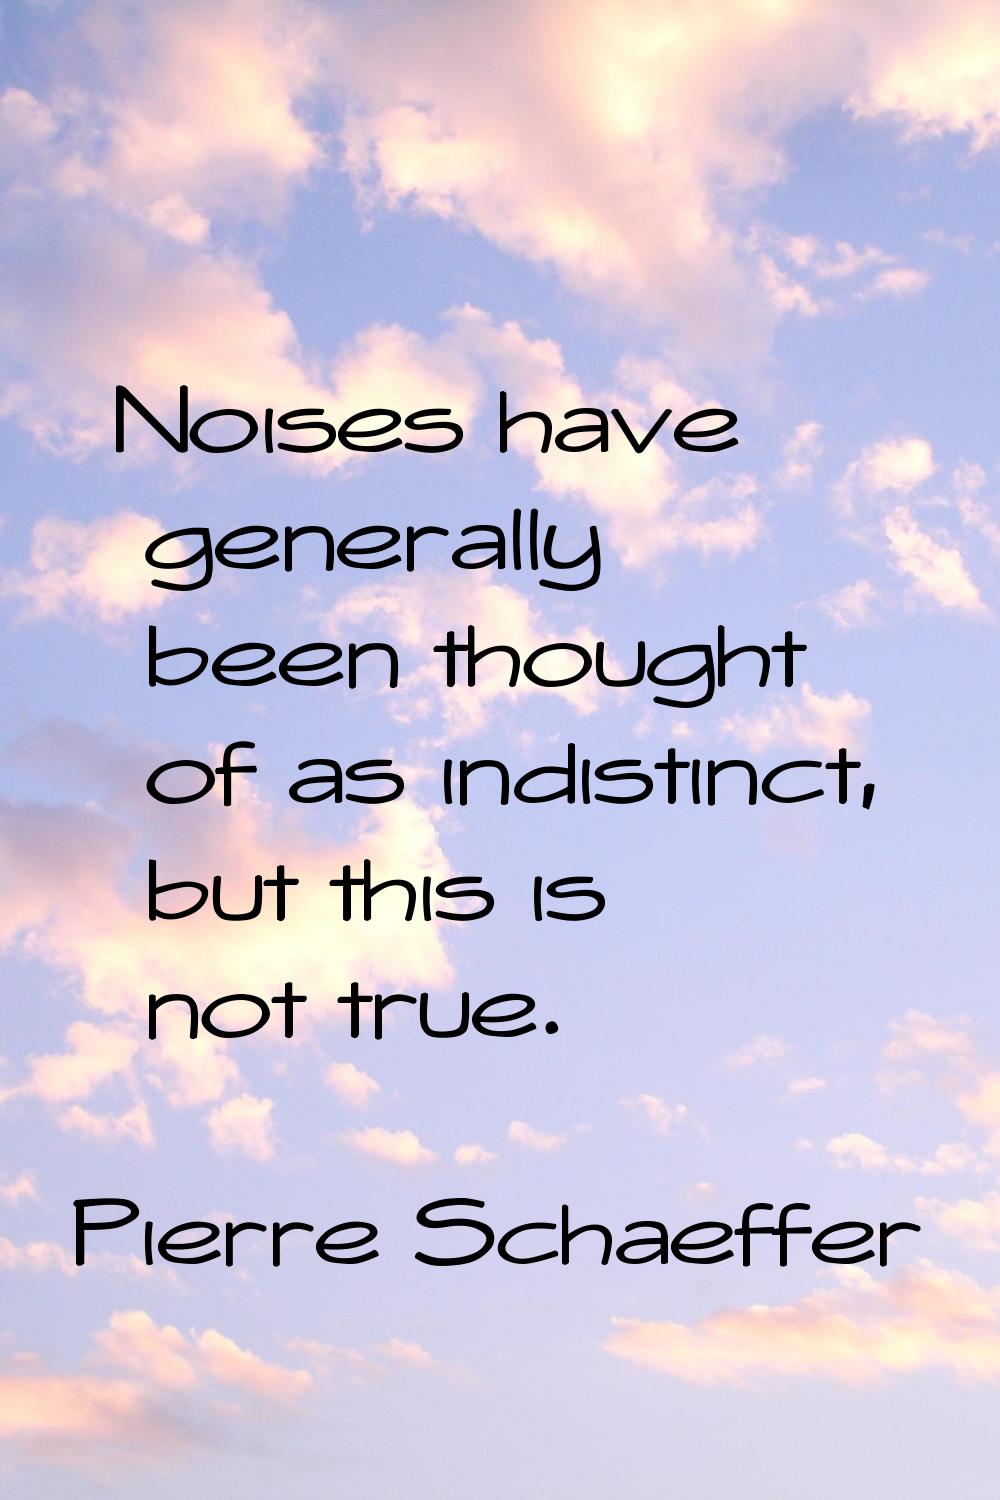 Noises have generally been thought of as indistinct, but this is not true.